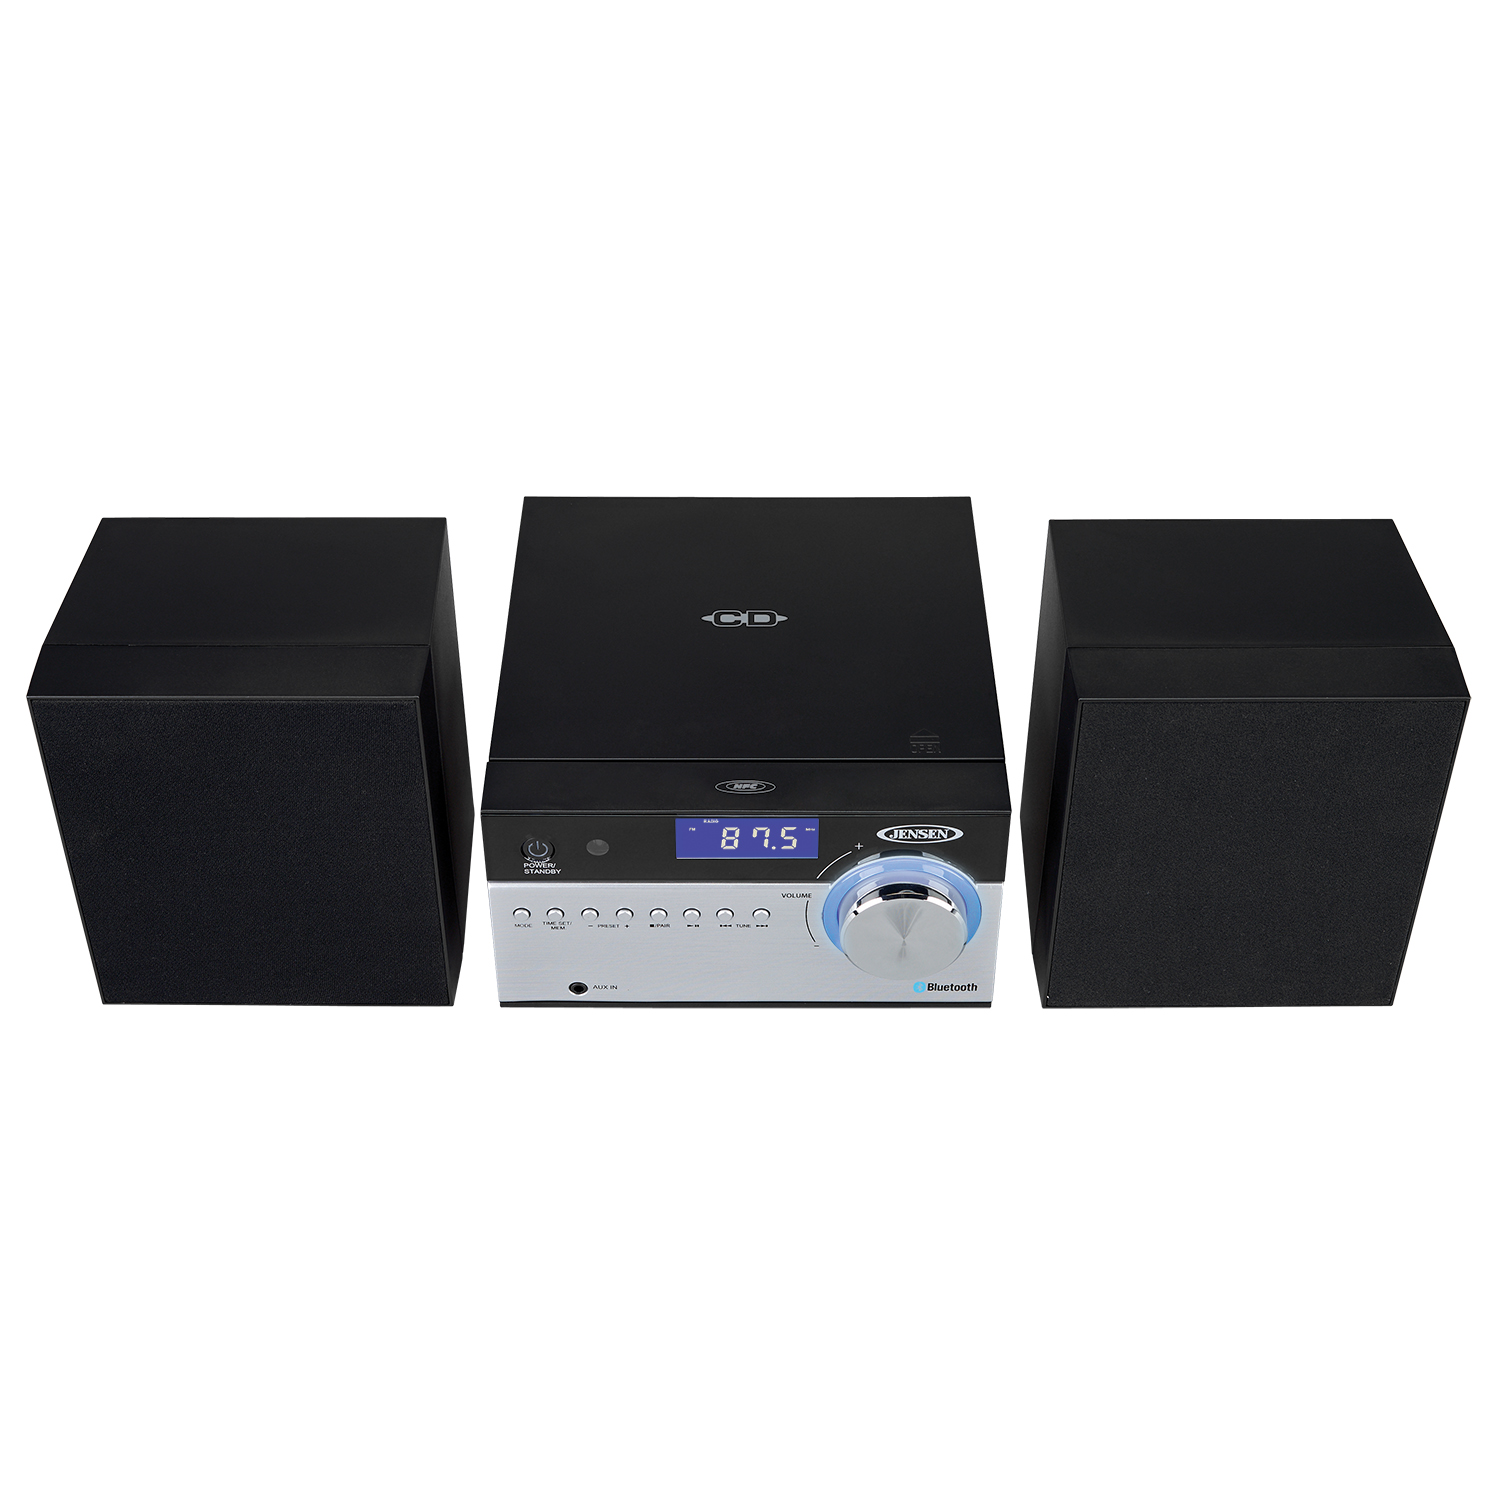 Jensen Bluetooth CD Music System with Digital AM/FM Stereo Receiver - JBS-200 - image 3 of 4